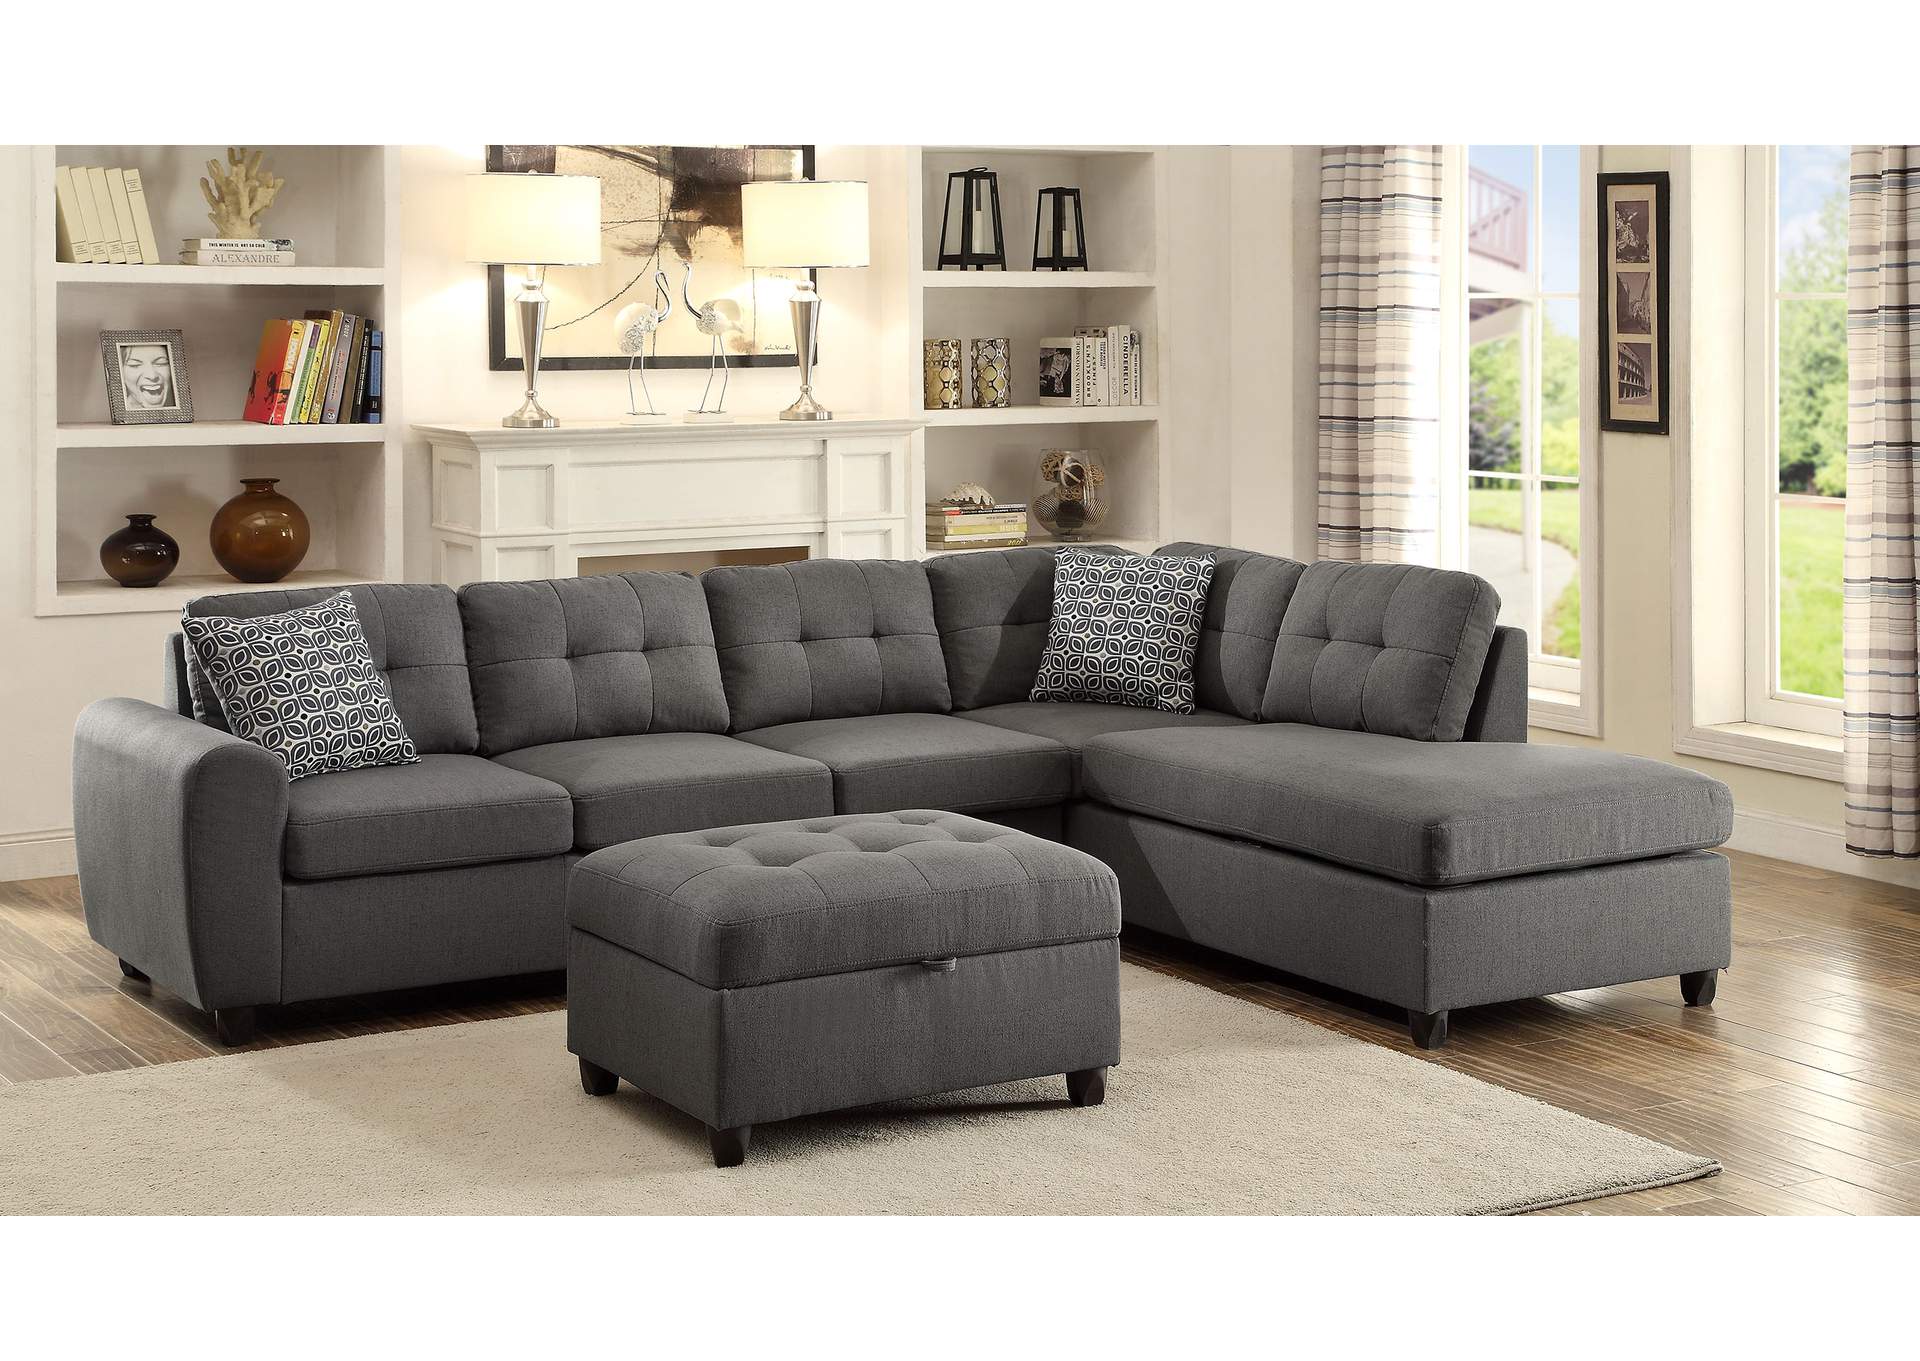 Stonenesse Tufted Sectional Grey,Coaster Furniture